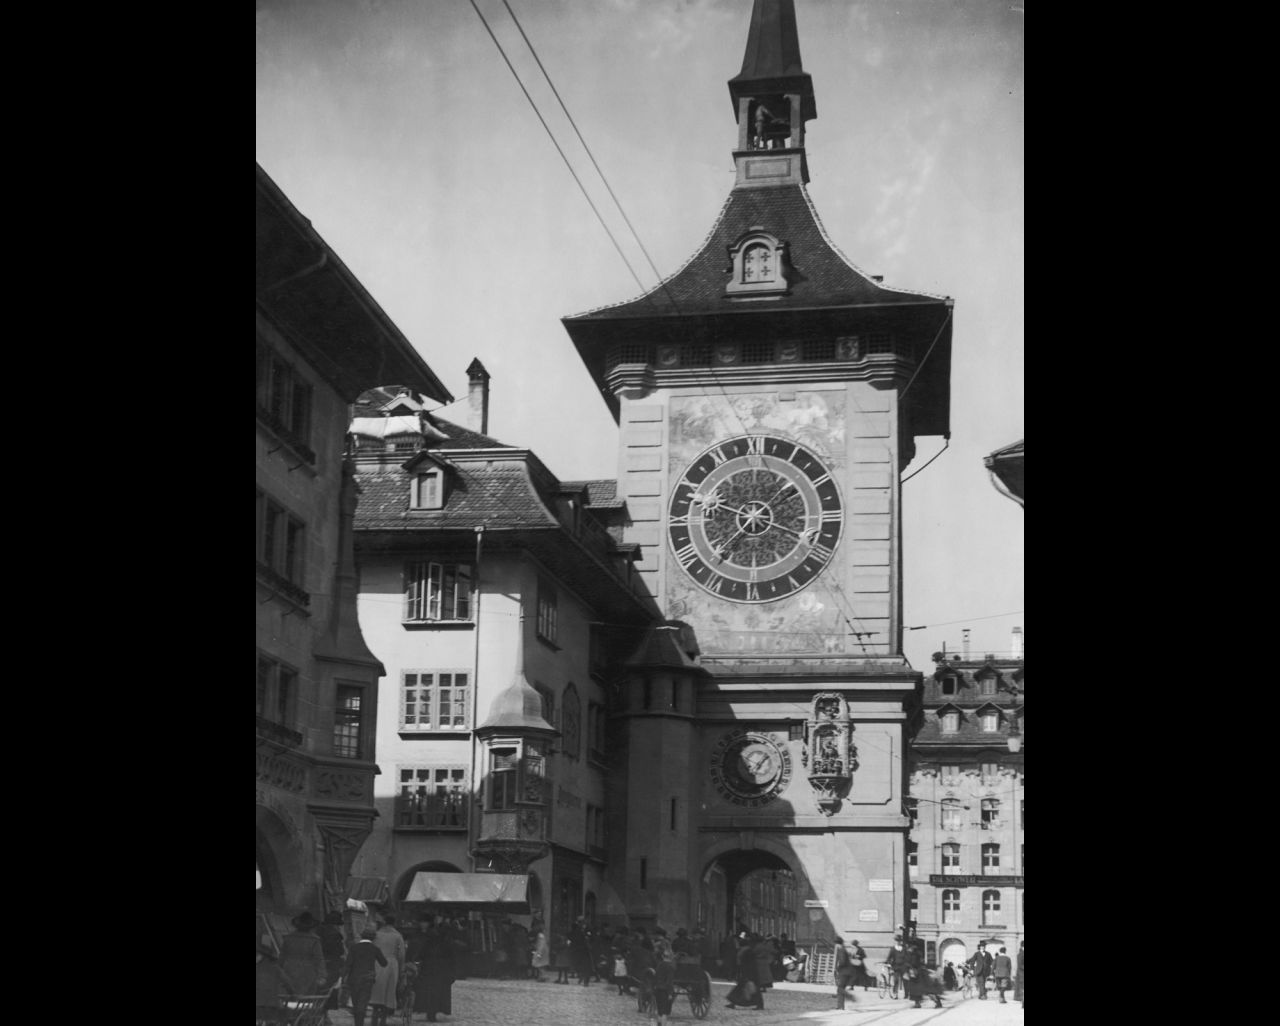 The Zytglogge clock tower in Bern, Switzerland, dates to the early 13th century and the clock itself to 1530.